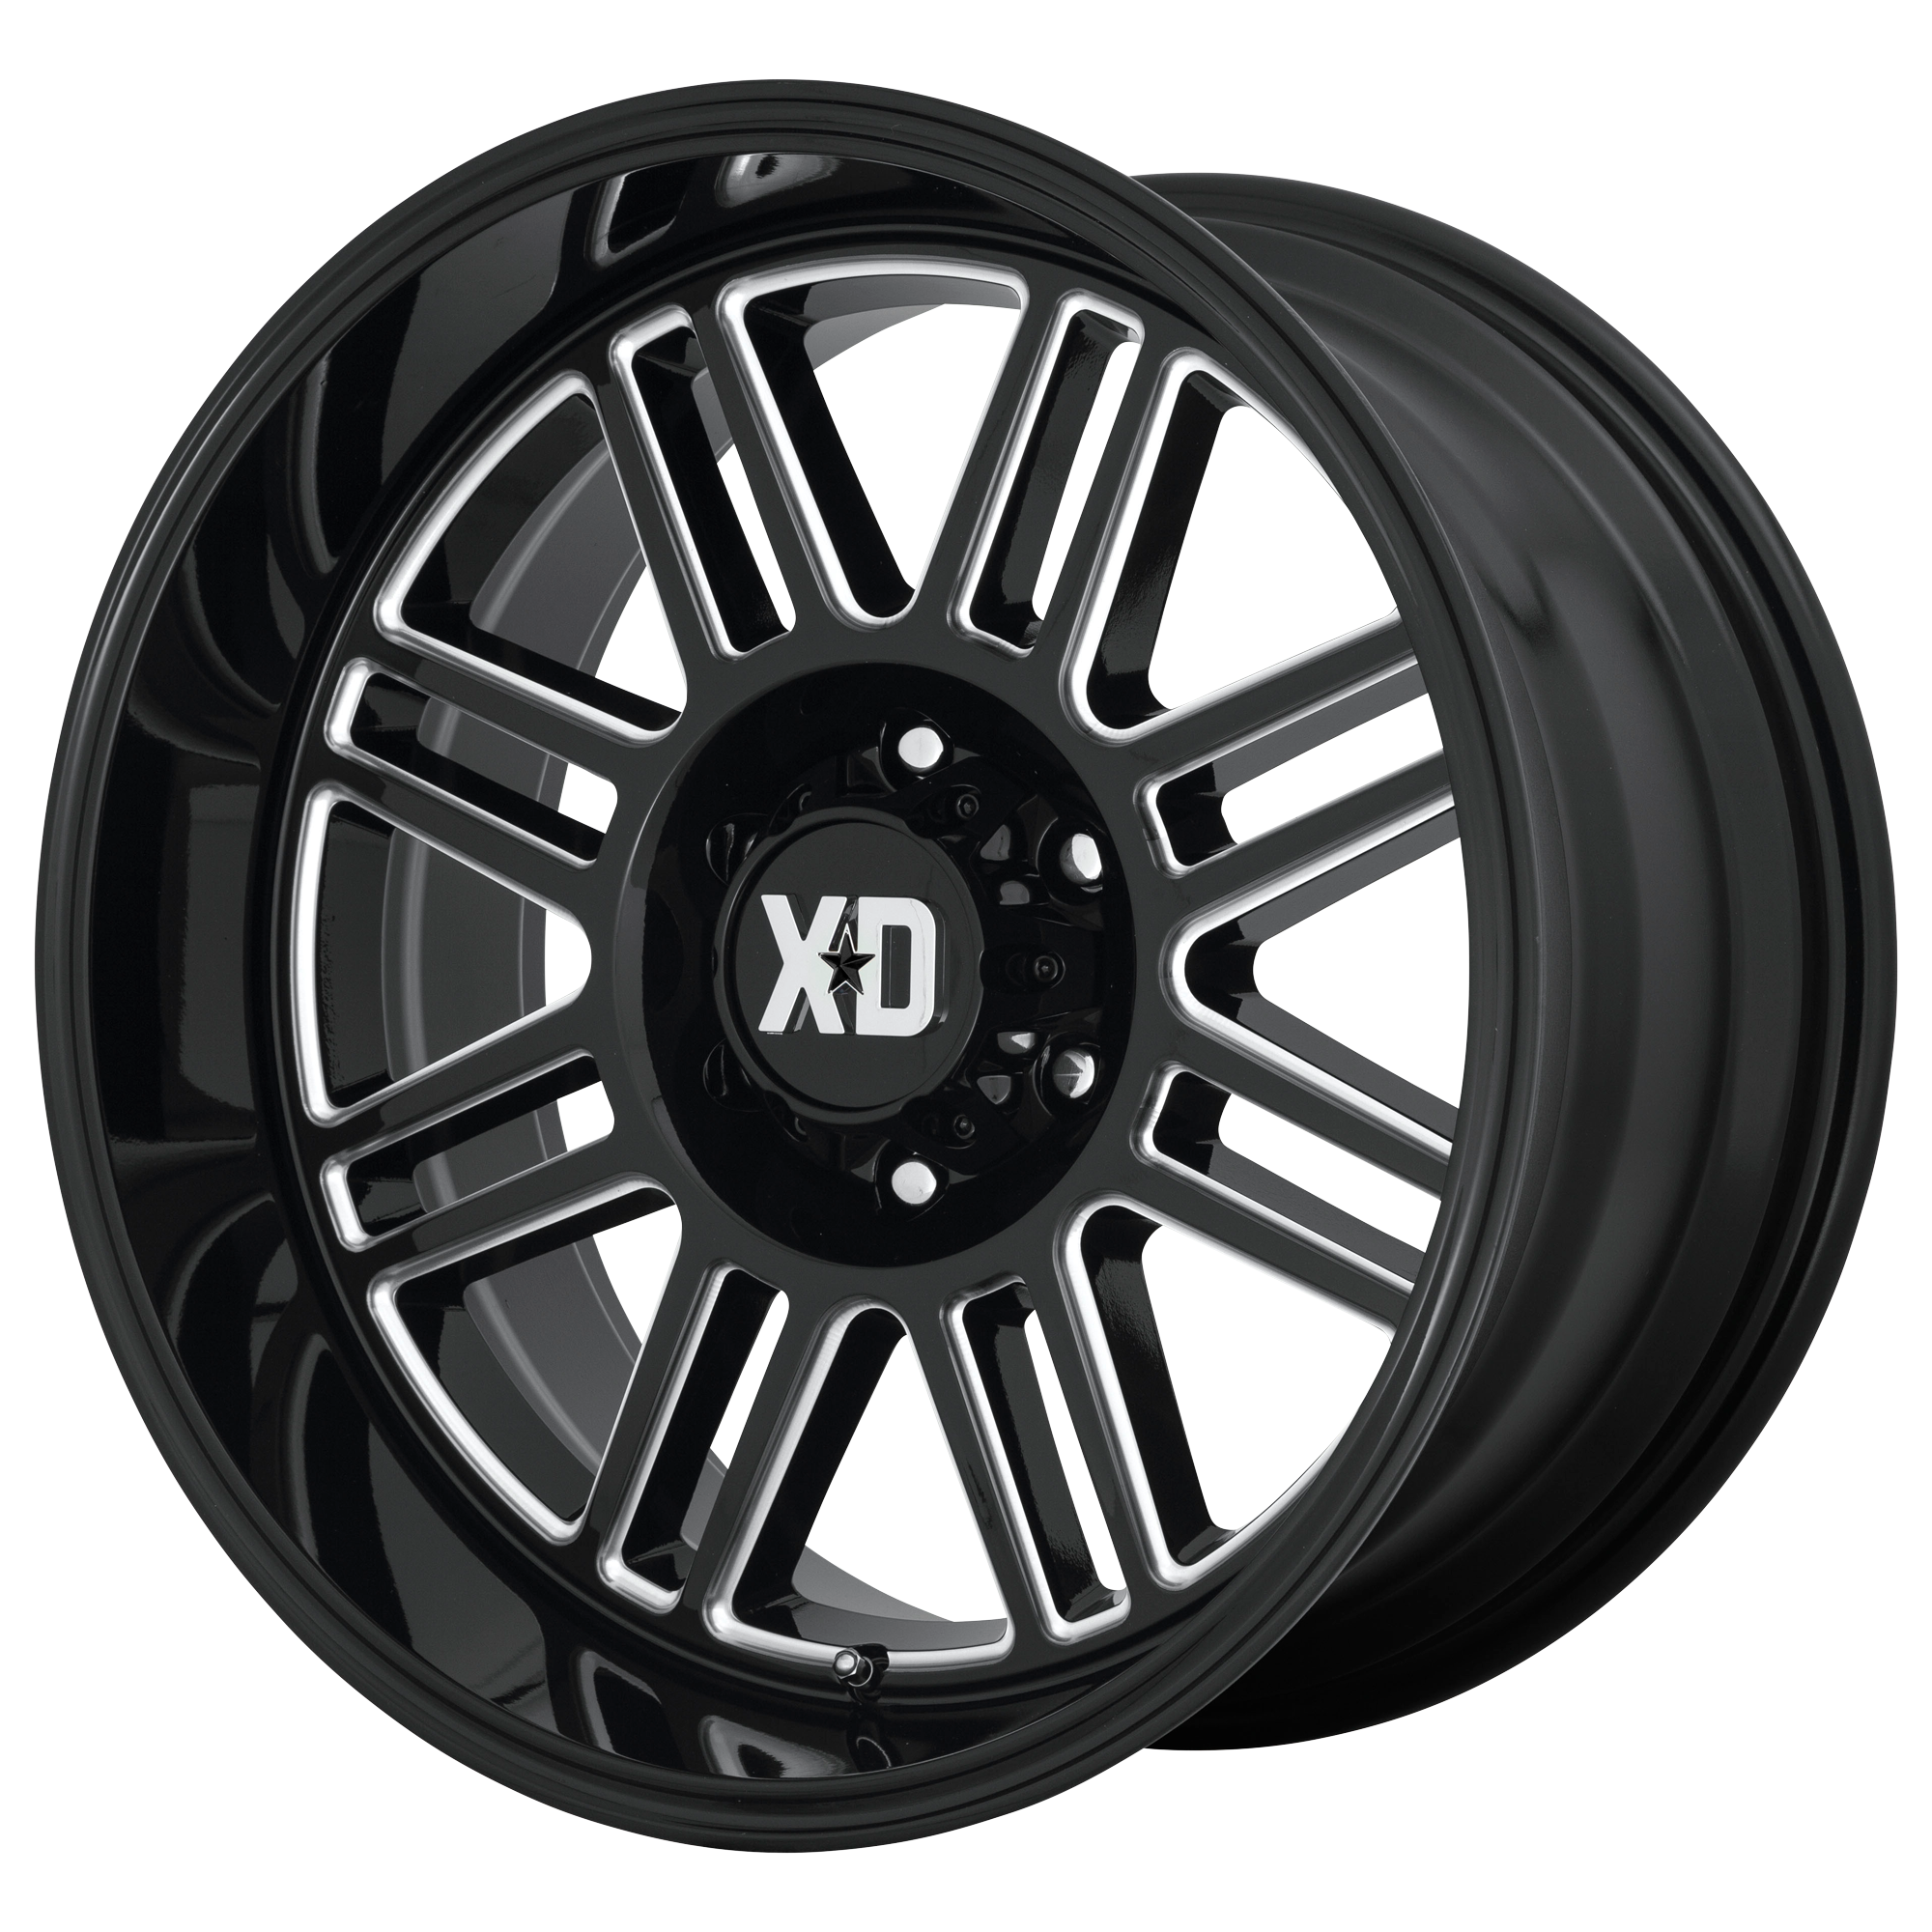 CAGE 20x9 6x120.00 GLOSS BLACK MILLED (18 mm) - Tires and Engine Performance